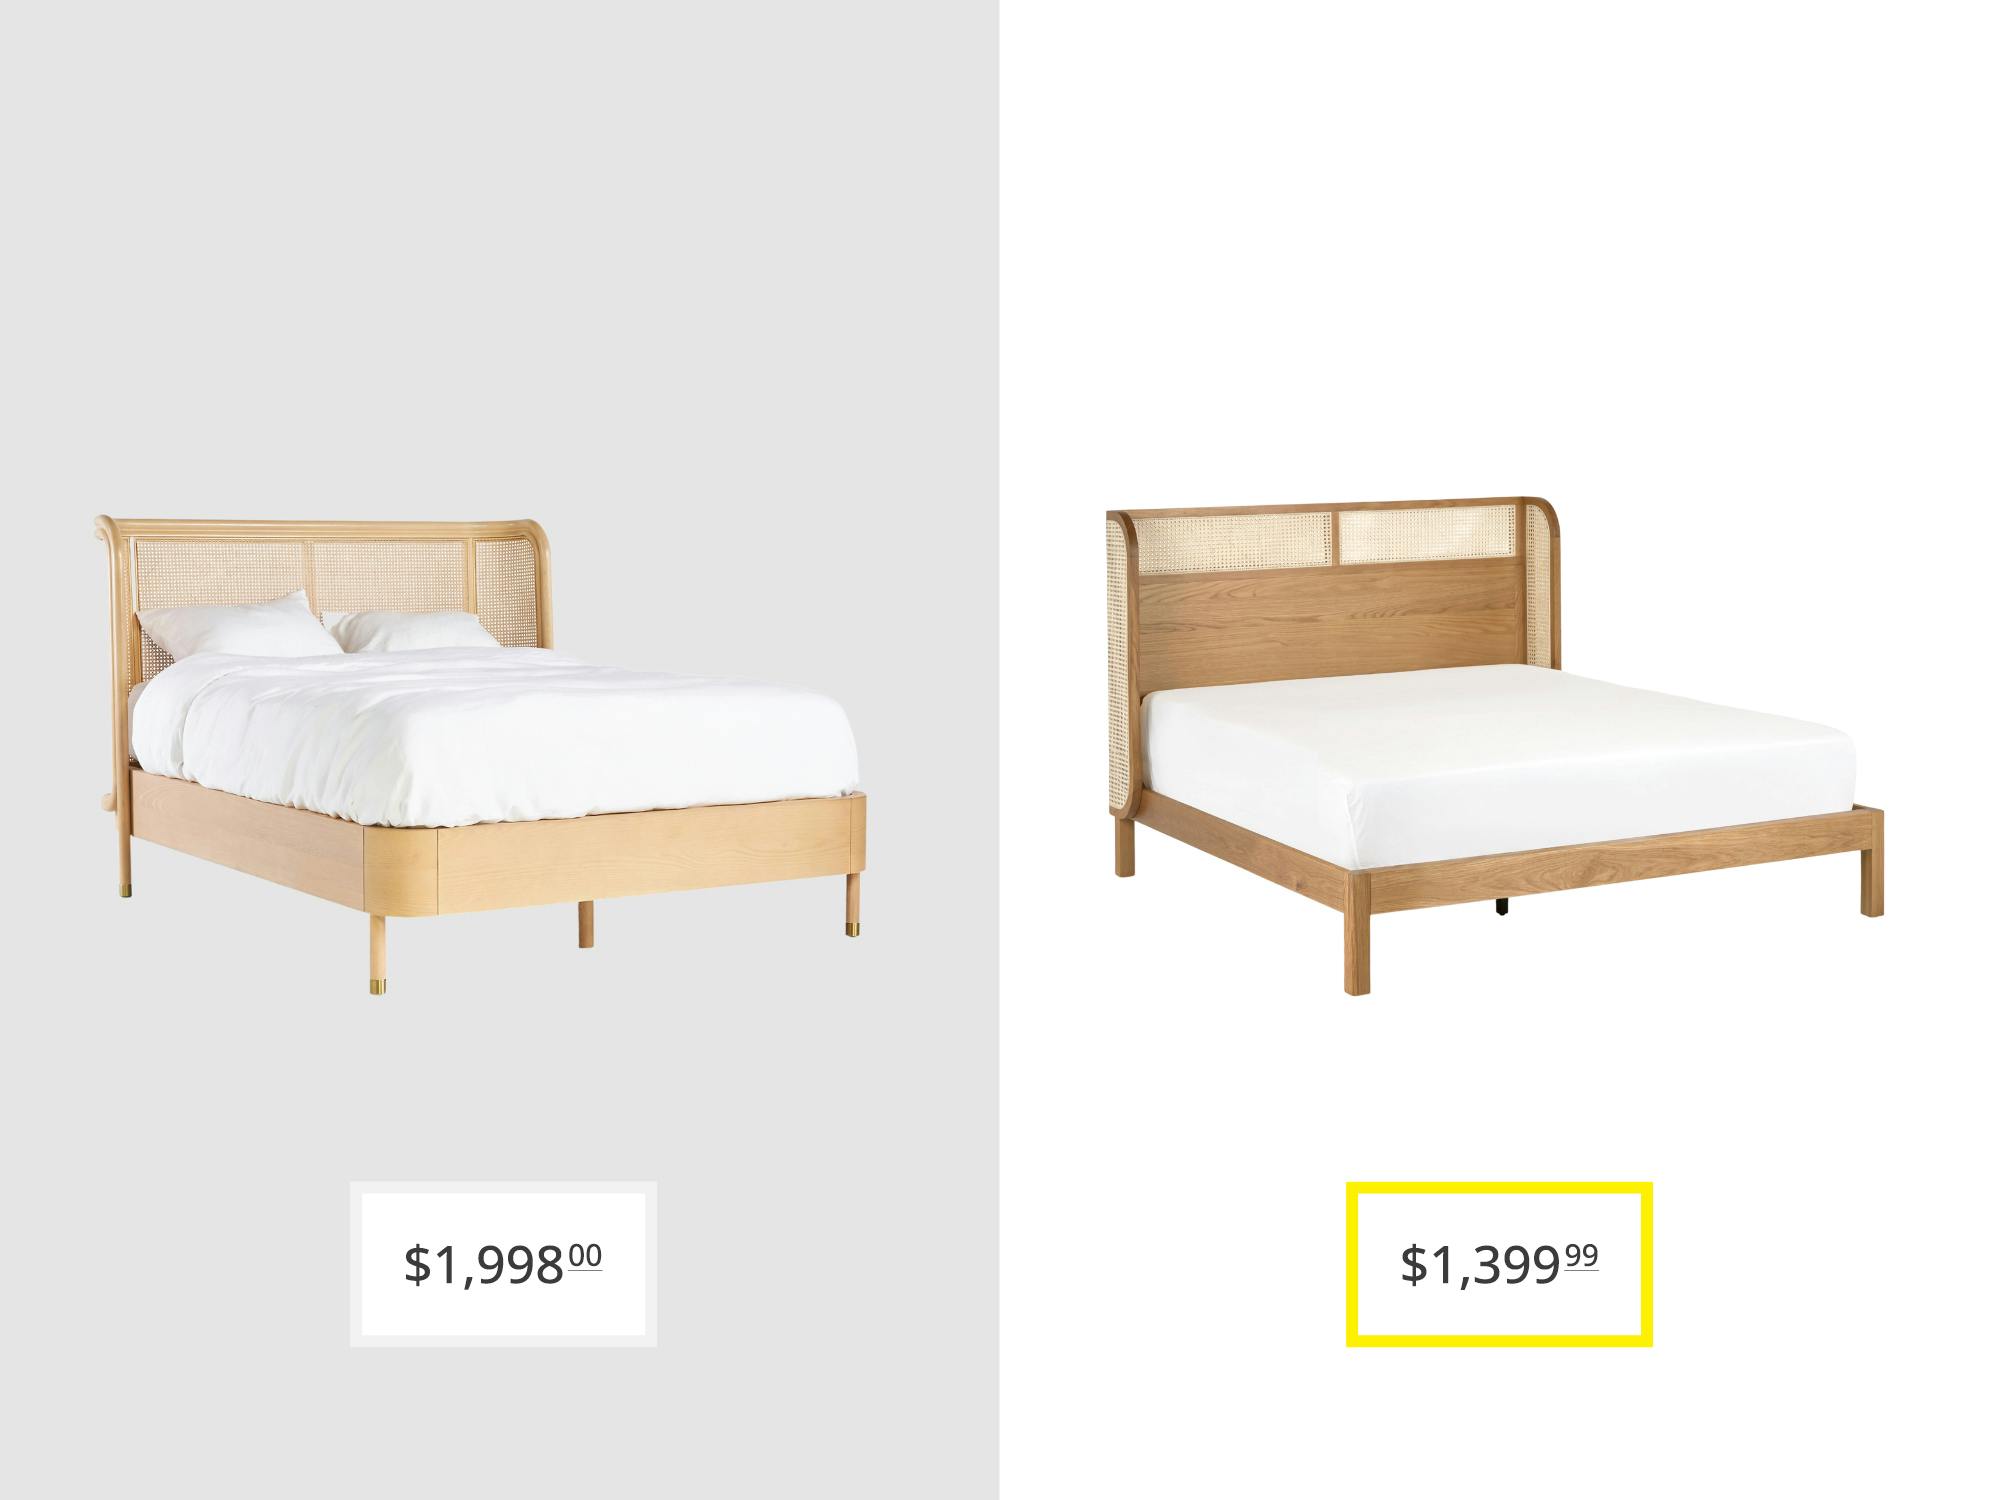 price comparison graphic with anthropologie heatherfield rattan queen bed and candra oak queen bed